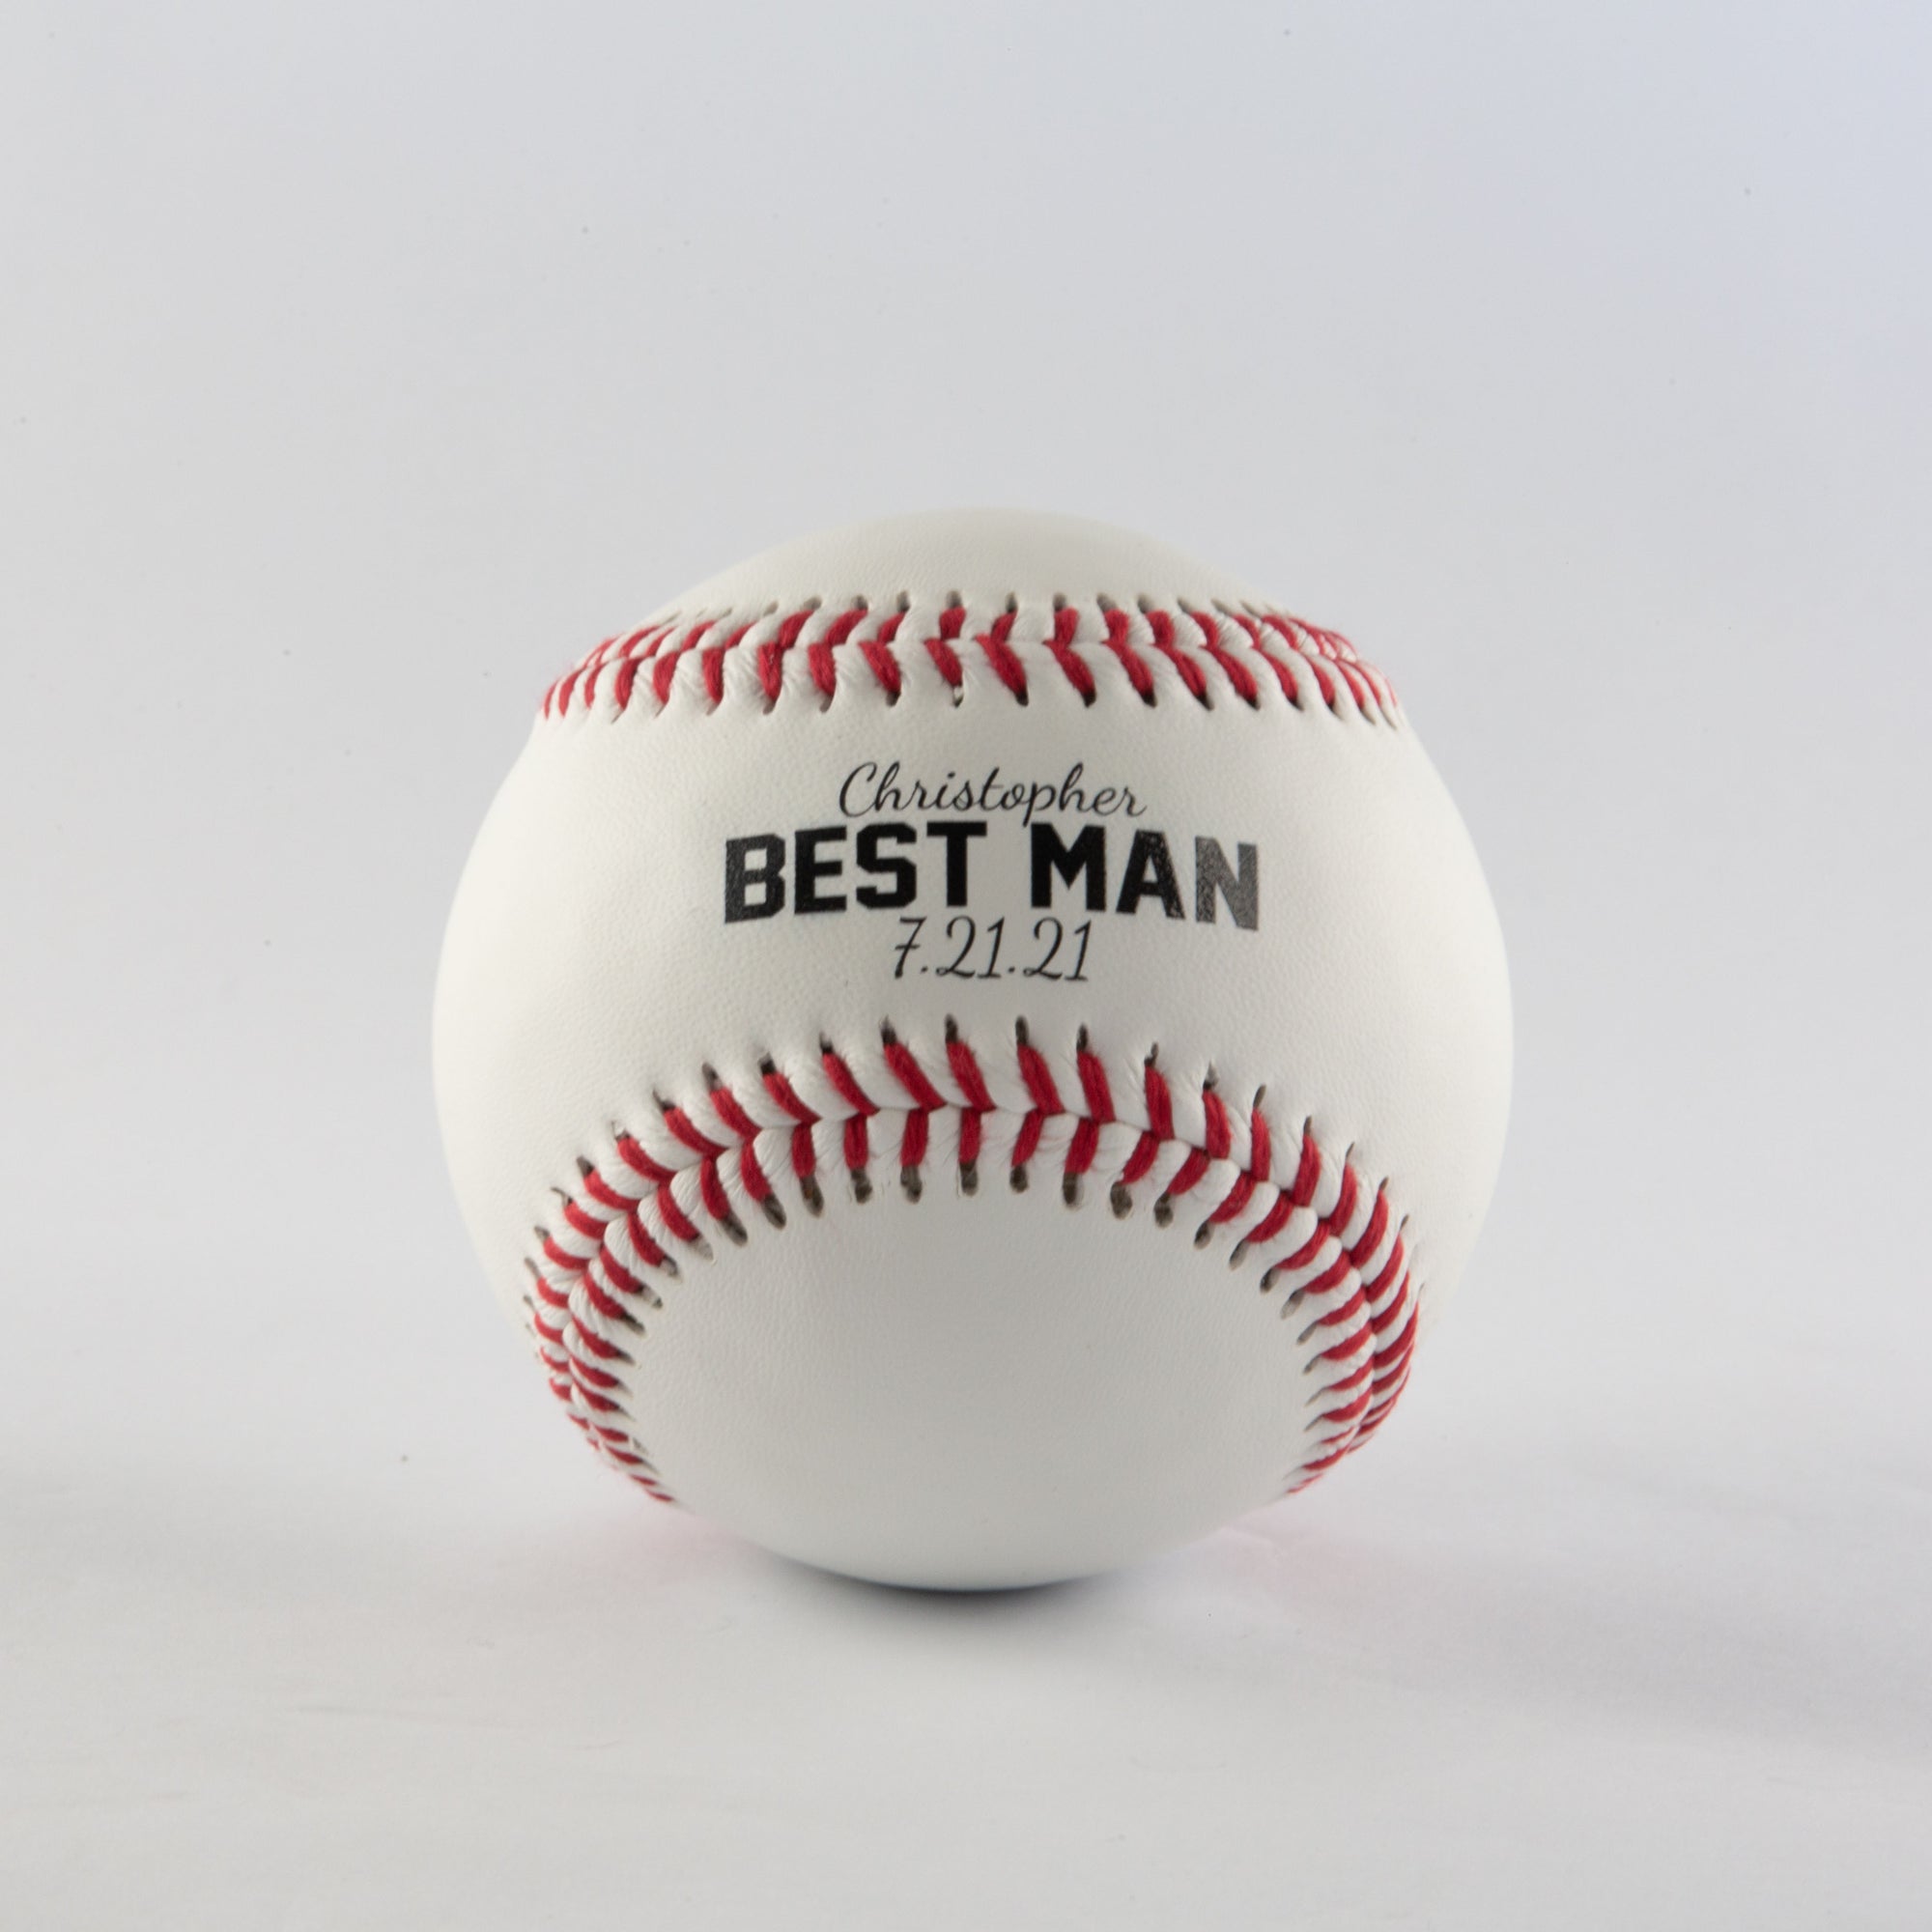 Wedding Party Gifts, Printed Baseball Between Laces